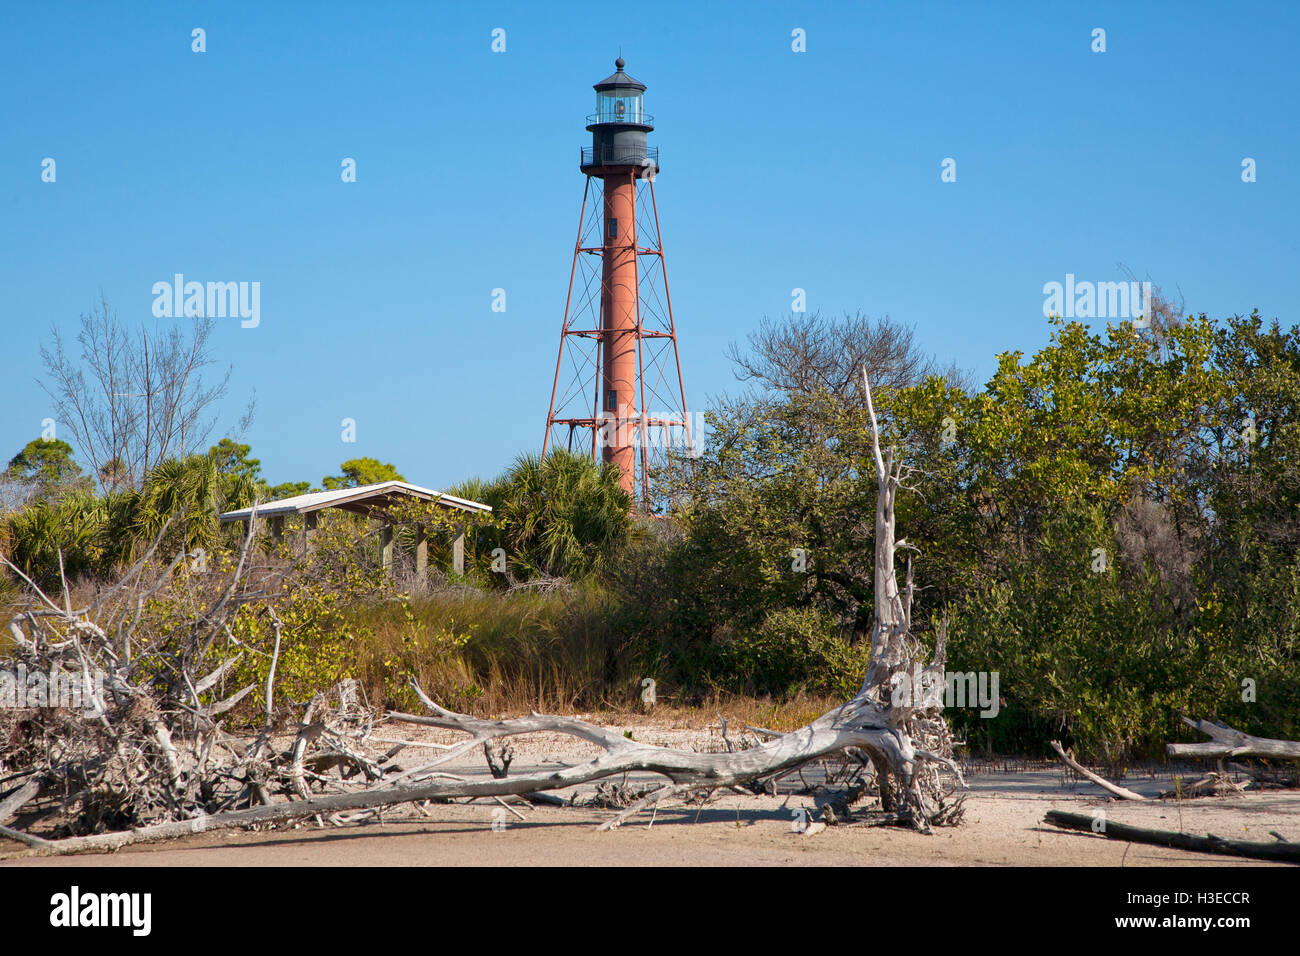 The skeletal square pyramidal brown tower of Anclote Key Lighthouse rises 110ft above the sabal palms & weathered scrub brush . Stock Photo